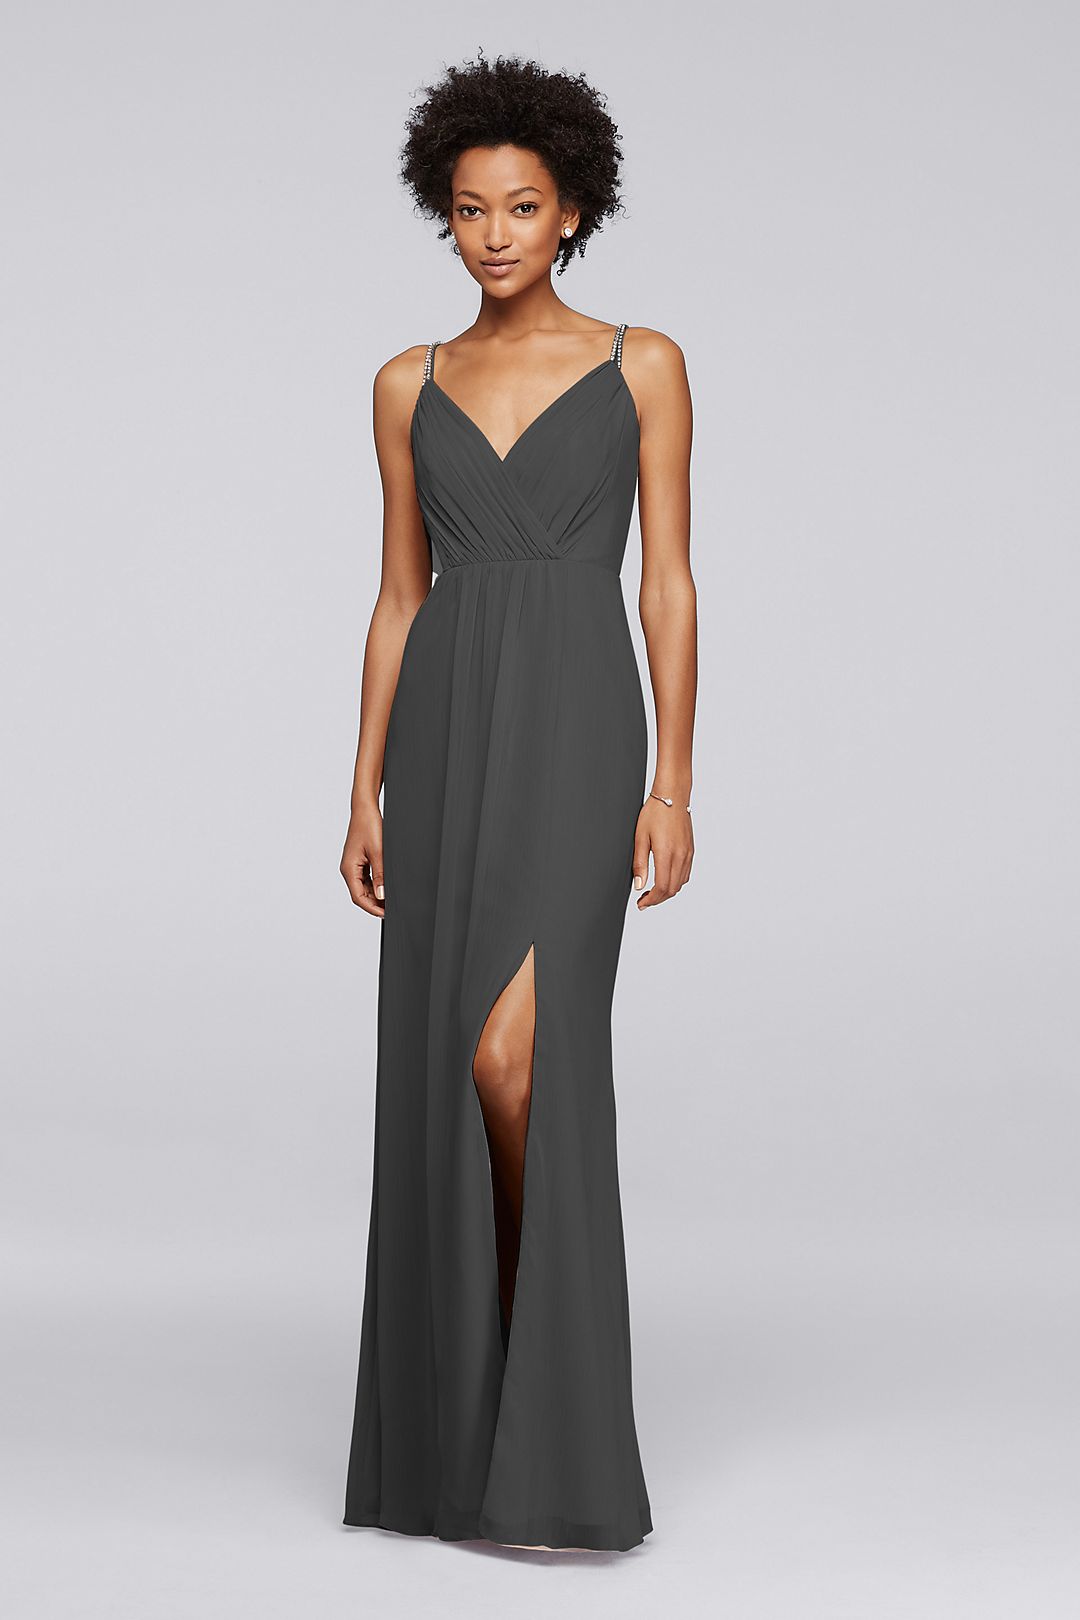 Long Bridesmaid Dress with Beaded Straps Image 1